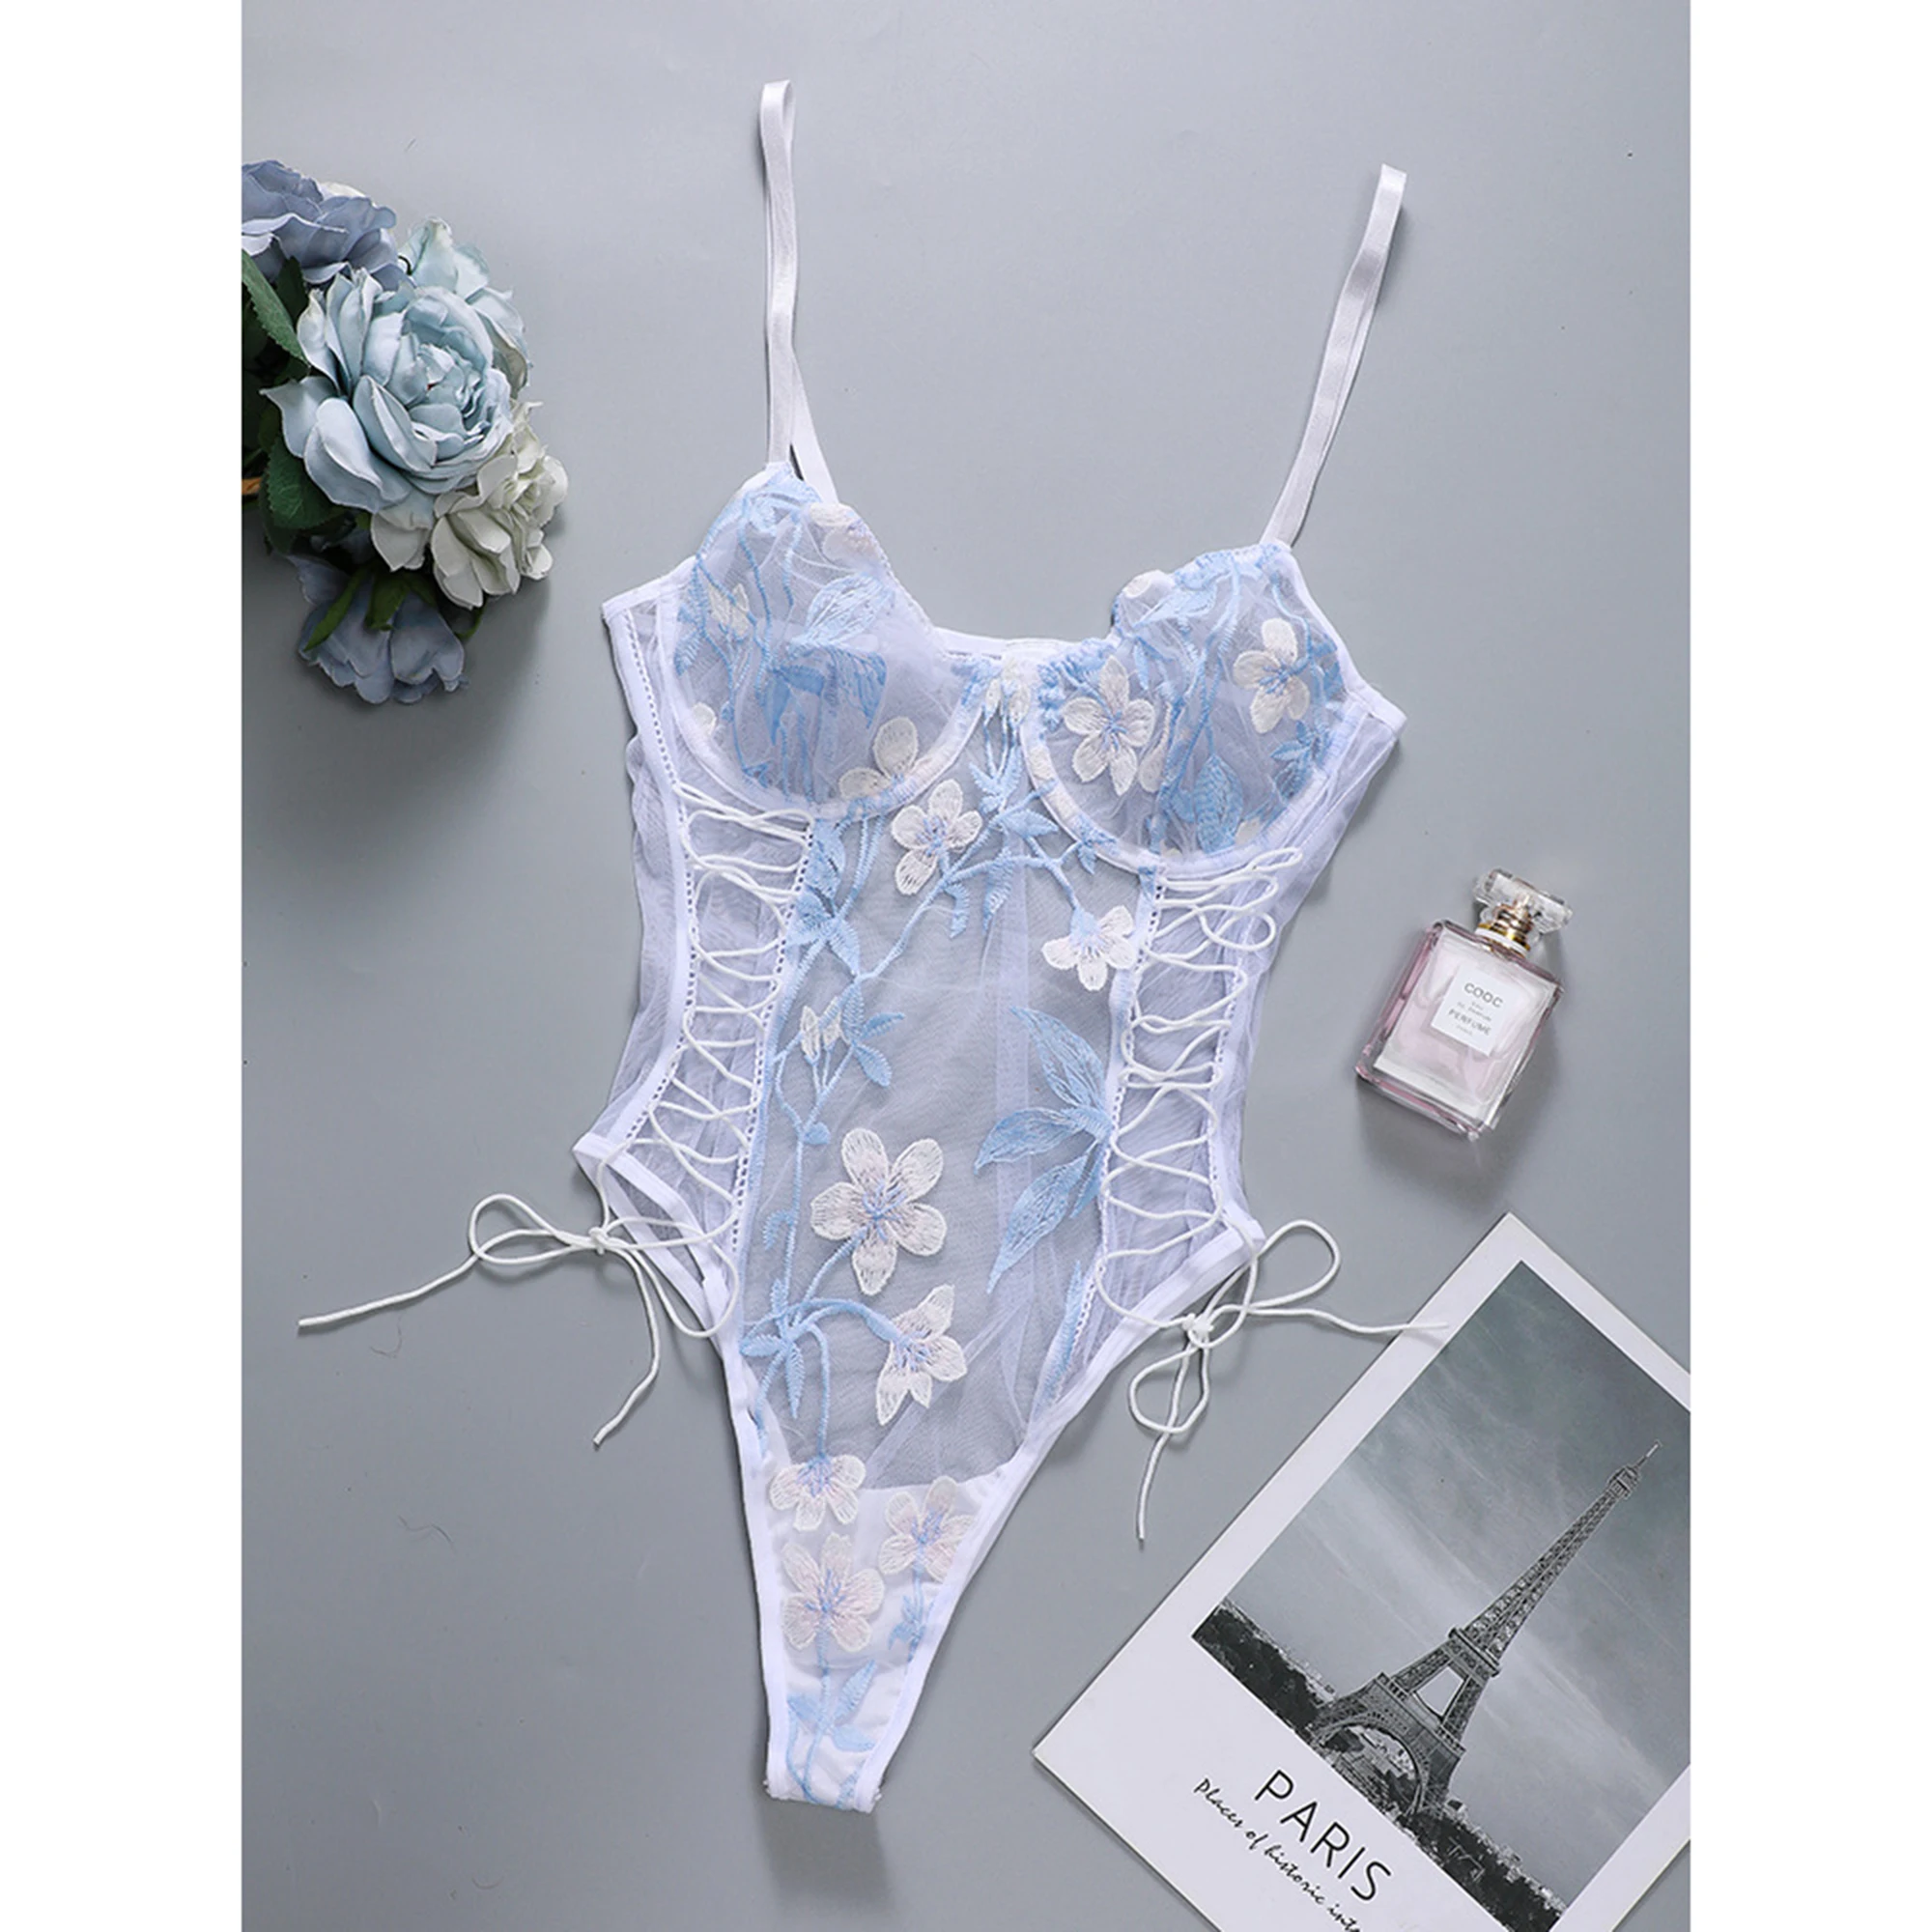 

New Arrival Women Sexy Floral Embroidery Transparent One Piece Lace Bodysuit Teddy Crotchless Lingerie, White